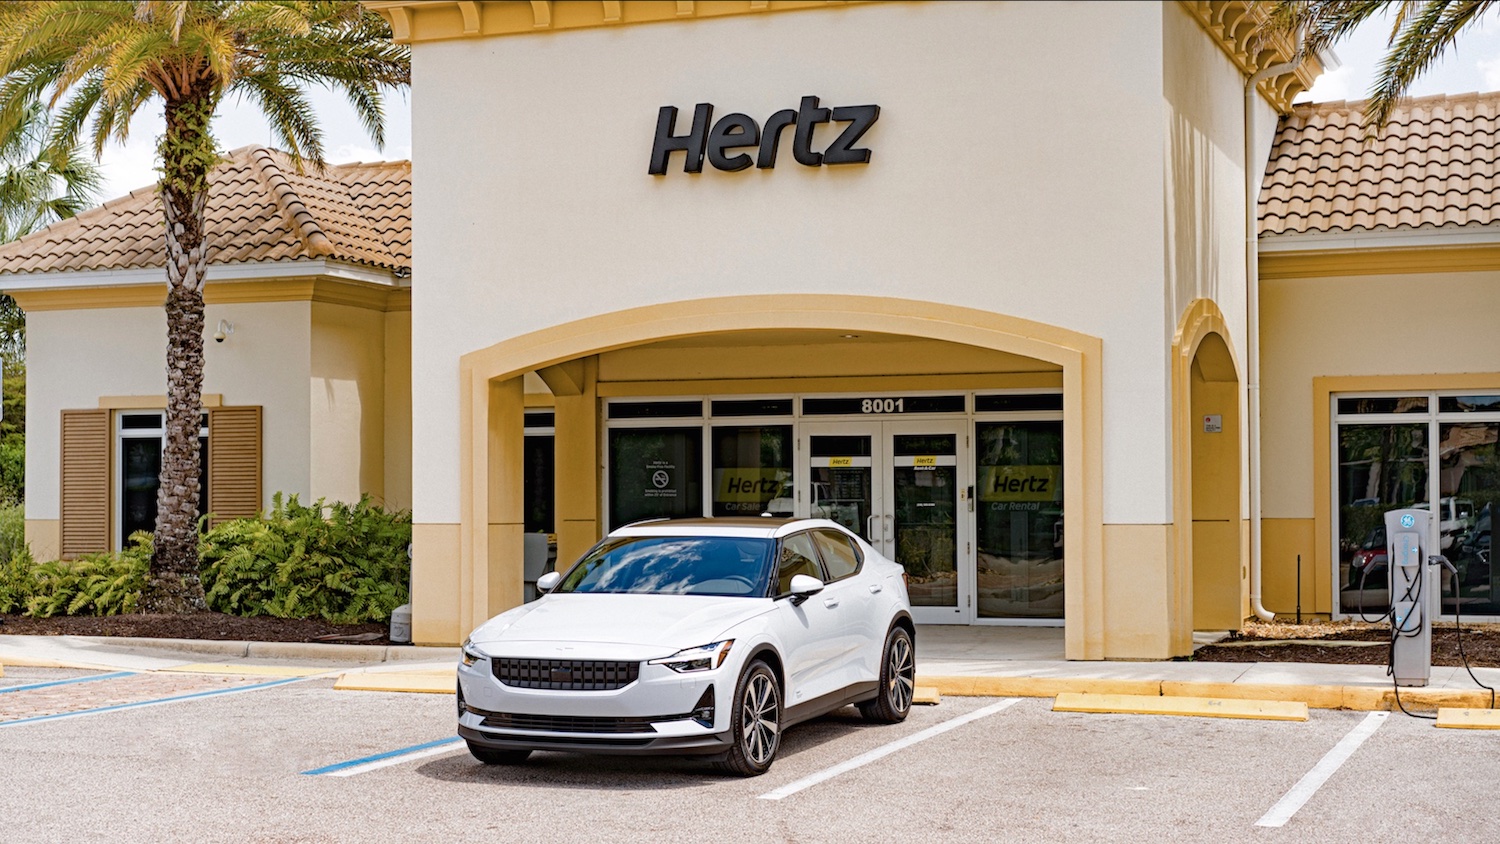 White Polestar 2 electric vehicle parked in front of a tan Hertz building.